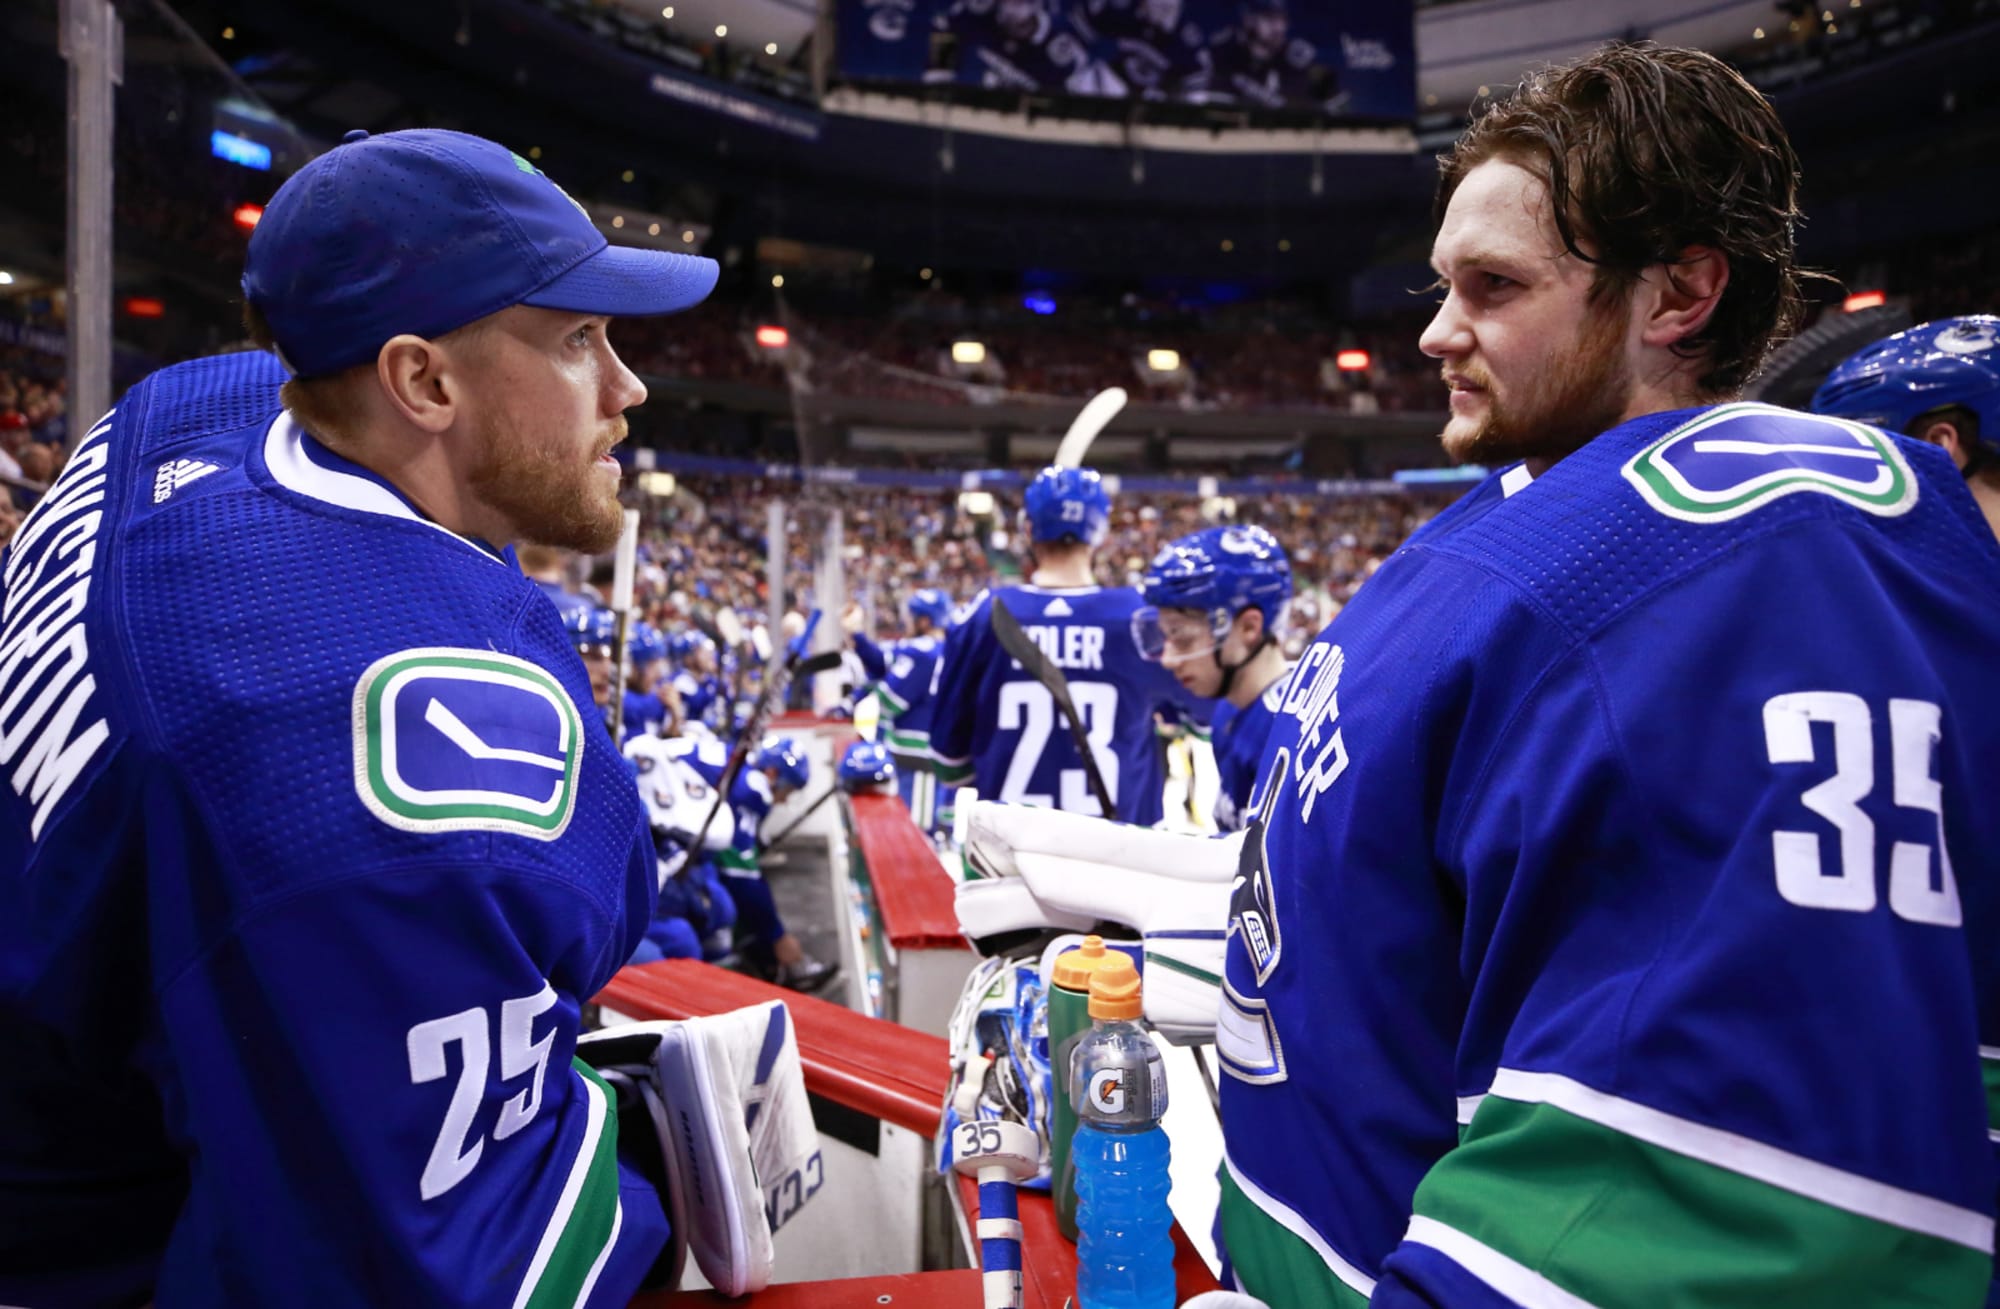 Vancouver Canucks on X: “Jacob Markstrom demonstrated incredible character  and focus, was a fierce competitor night in and night out, and was a big  part of our team. Equally impressive was his